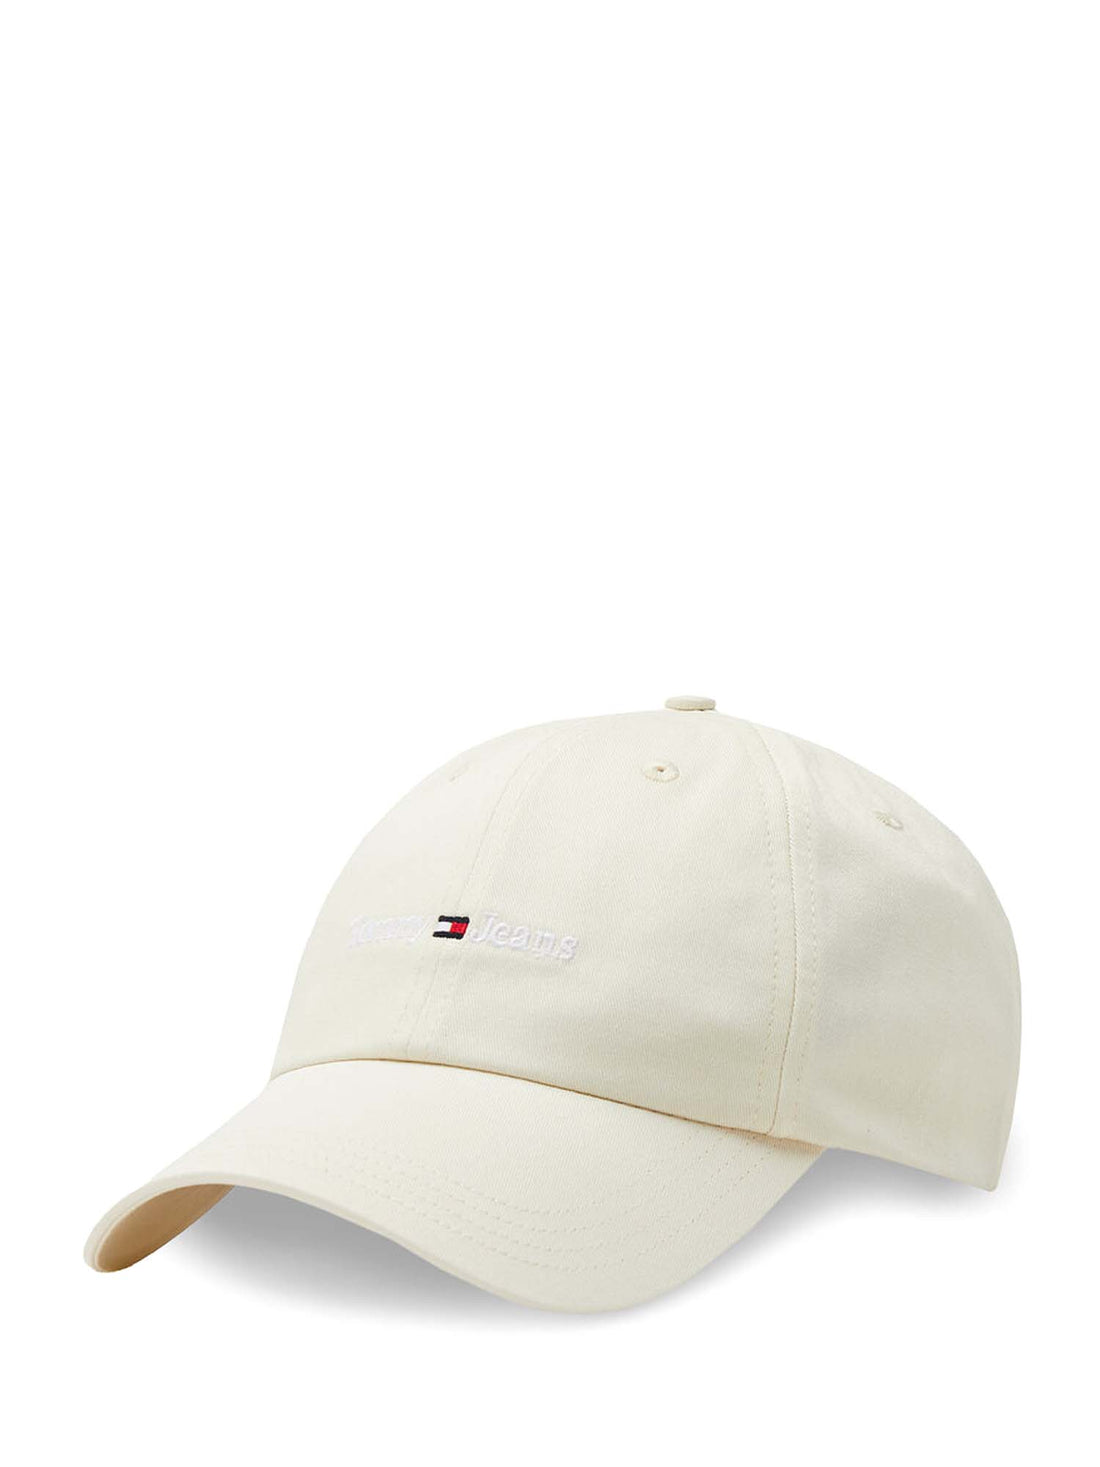 Cappelli Avorio Tommy Hilfiger